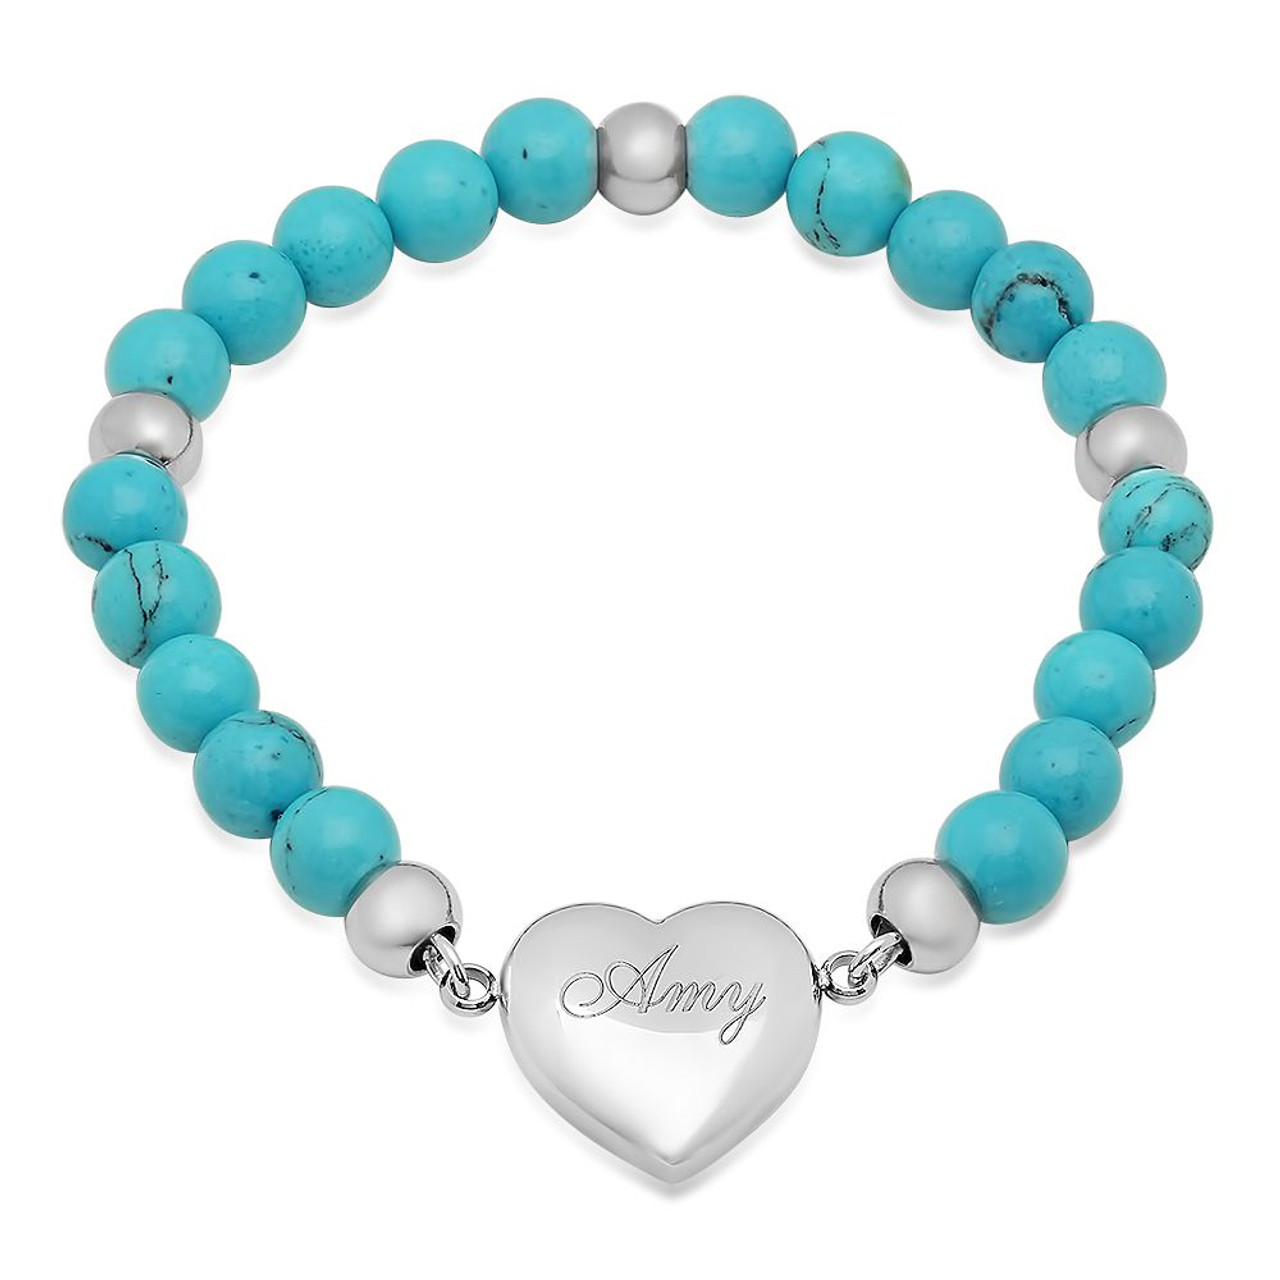 Female Personalized Hearts Bracelet With Names, Party at Rs 450 in Jaipur